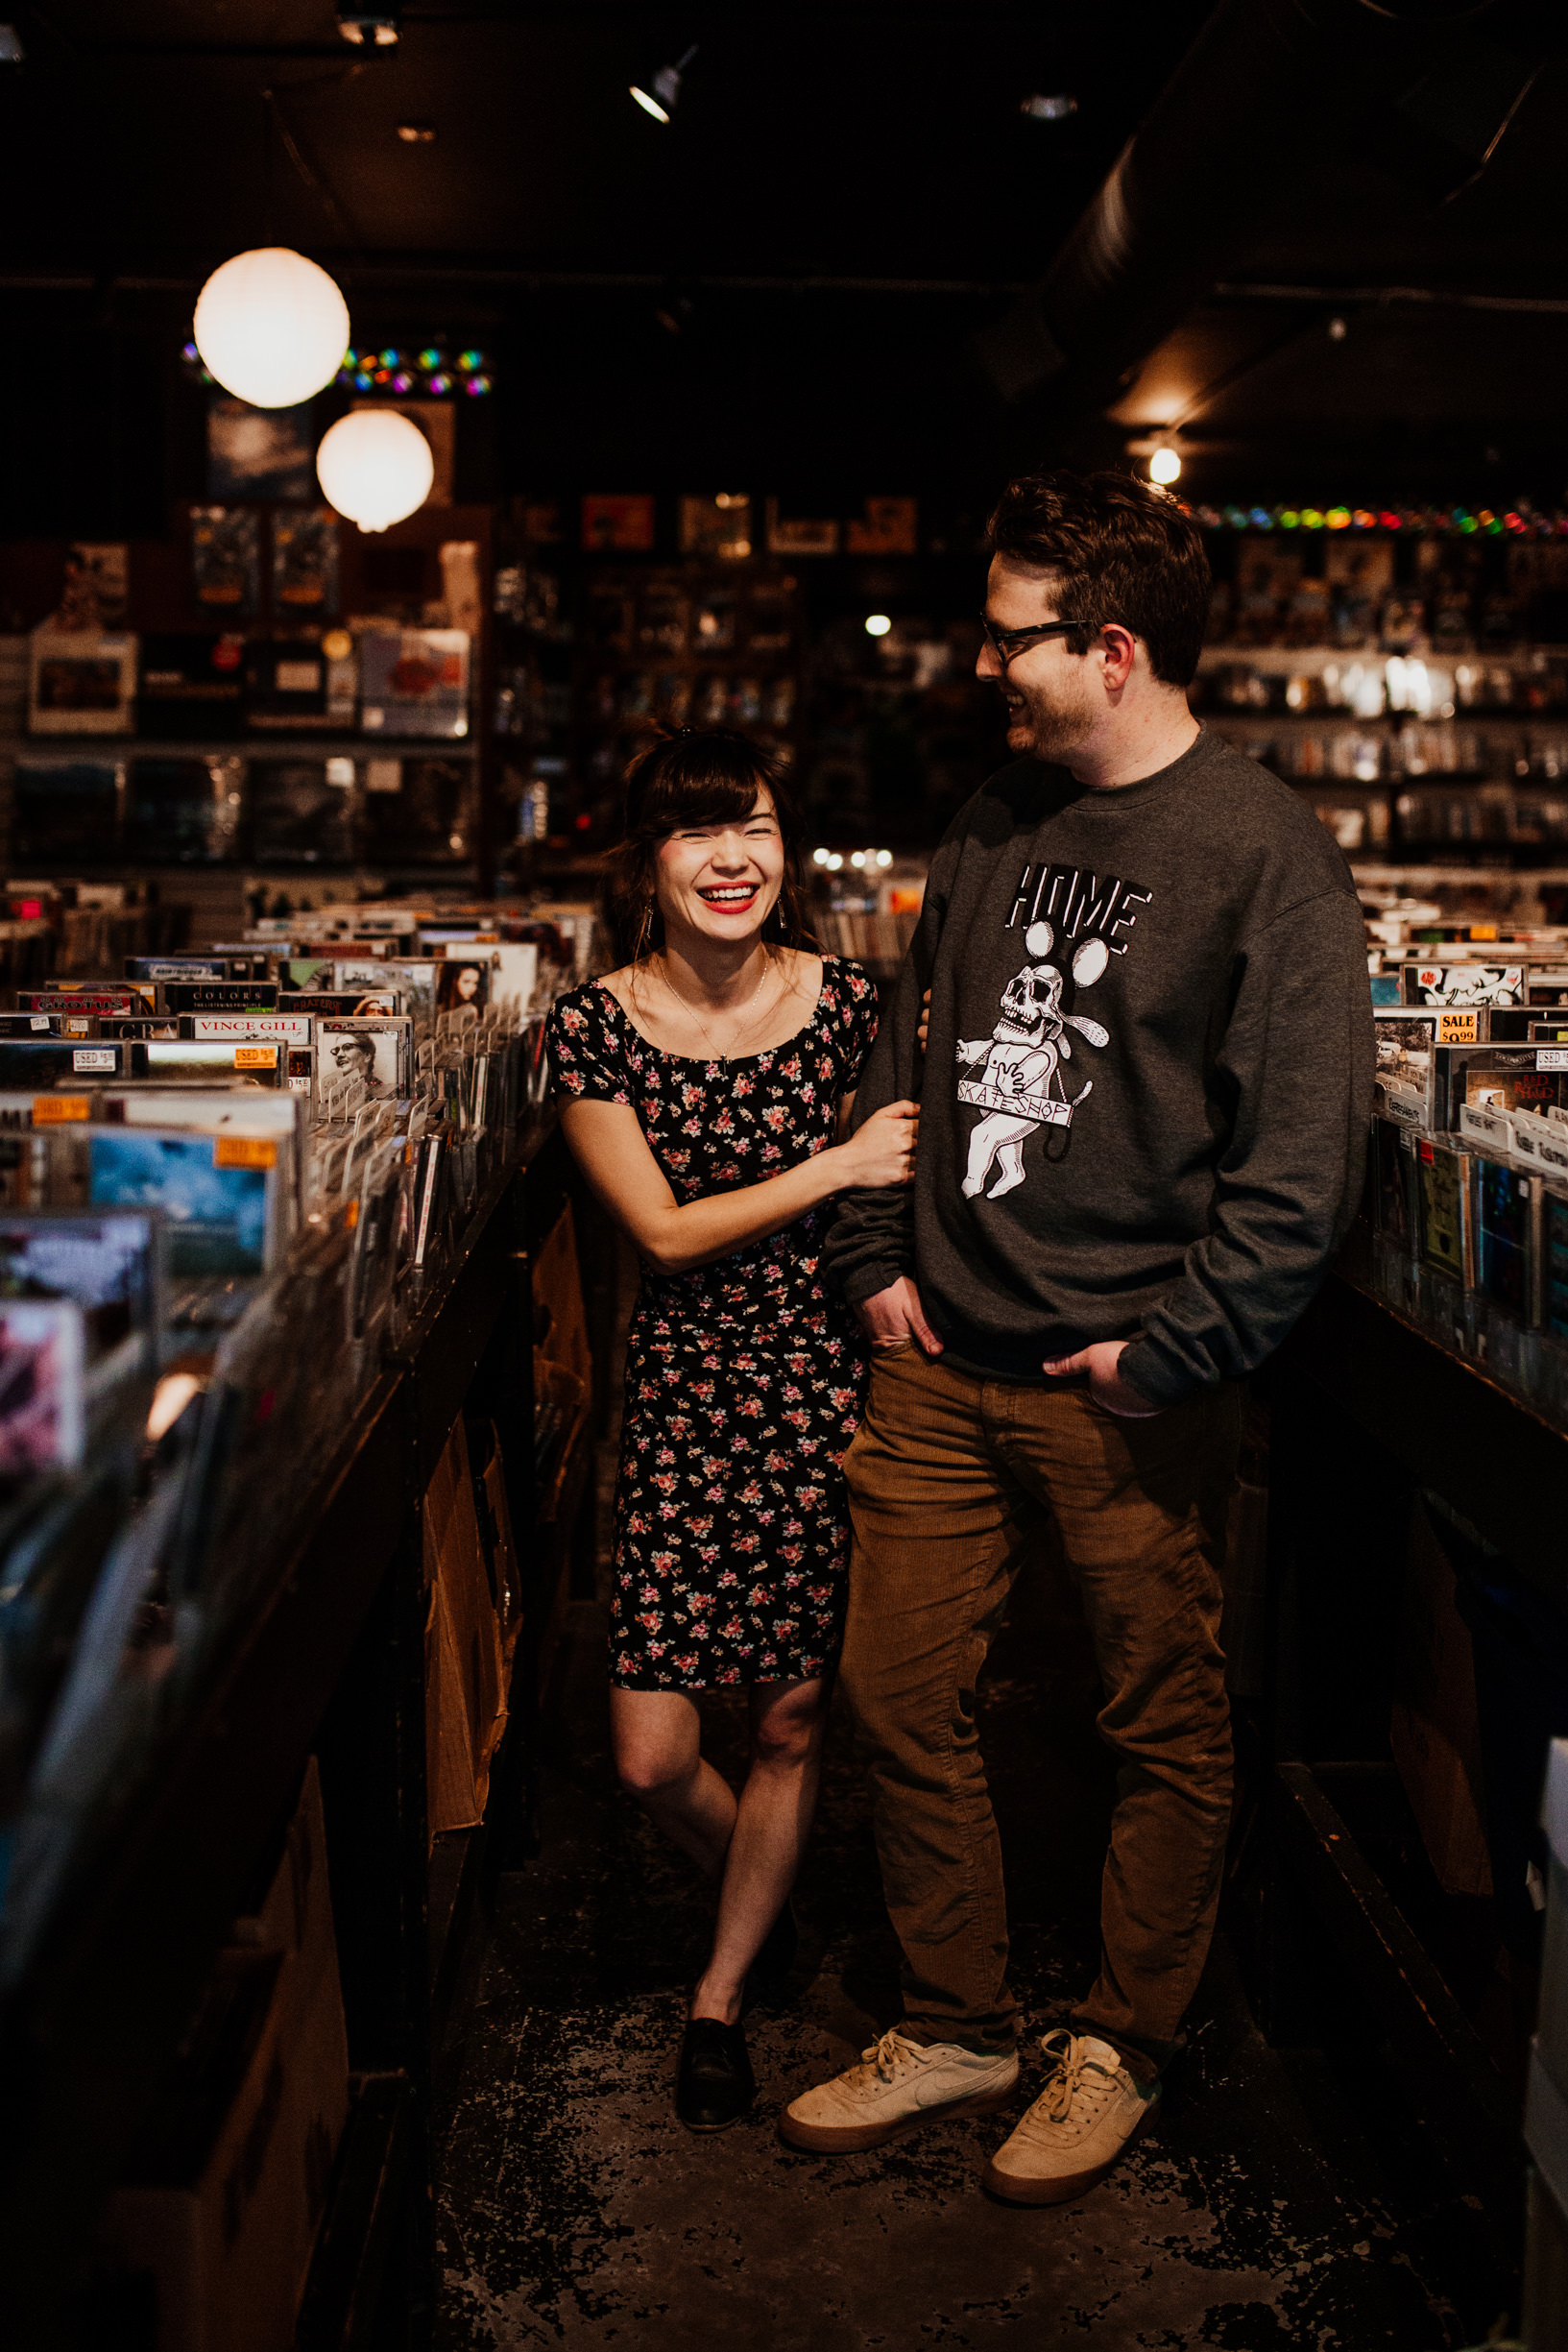 louisville-engagement-photographer-record-store-in-home-session-crystal-ludwick-photo (38 of 53).jpg